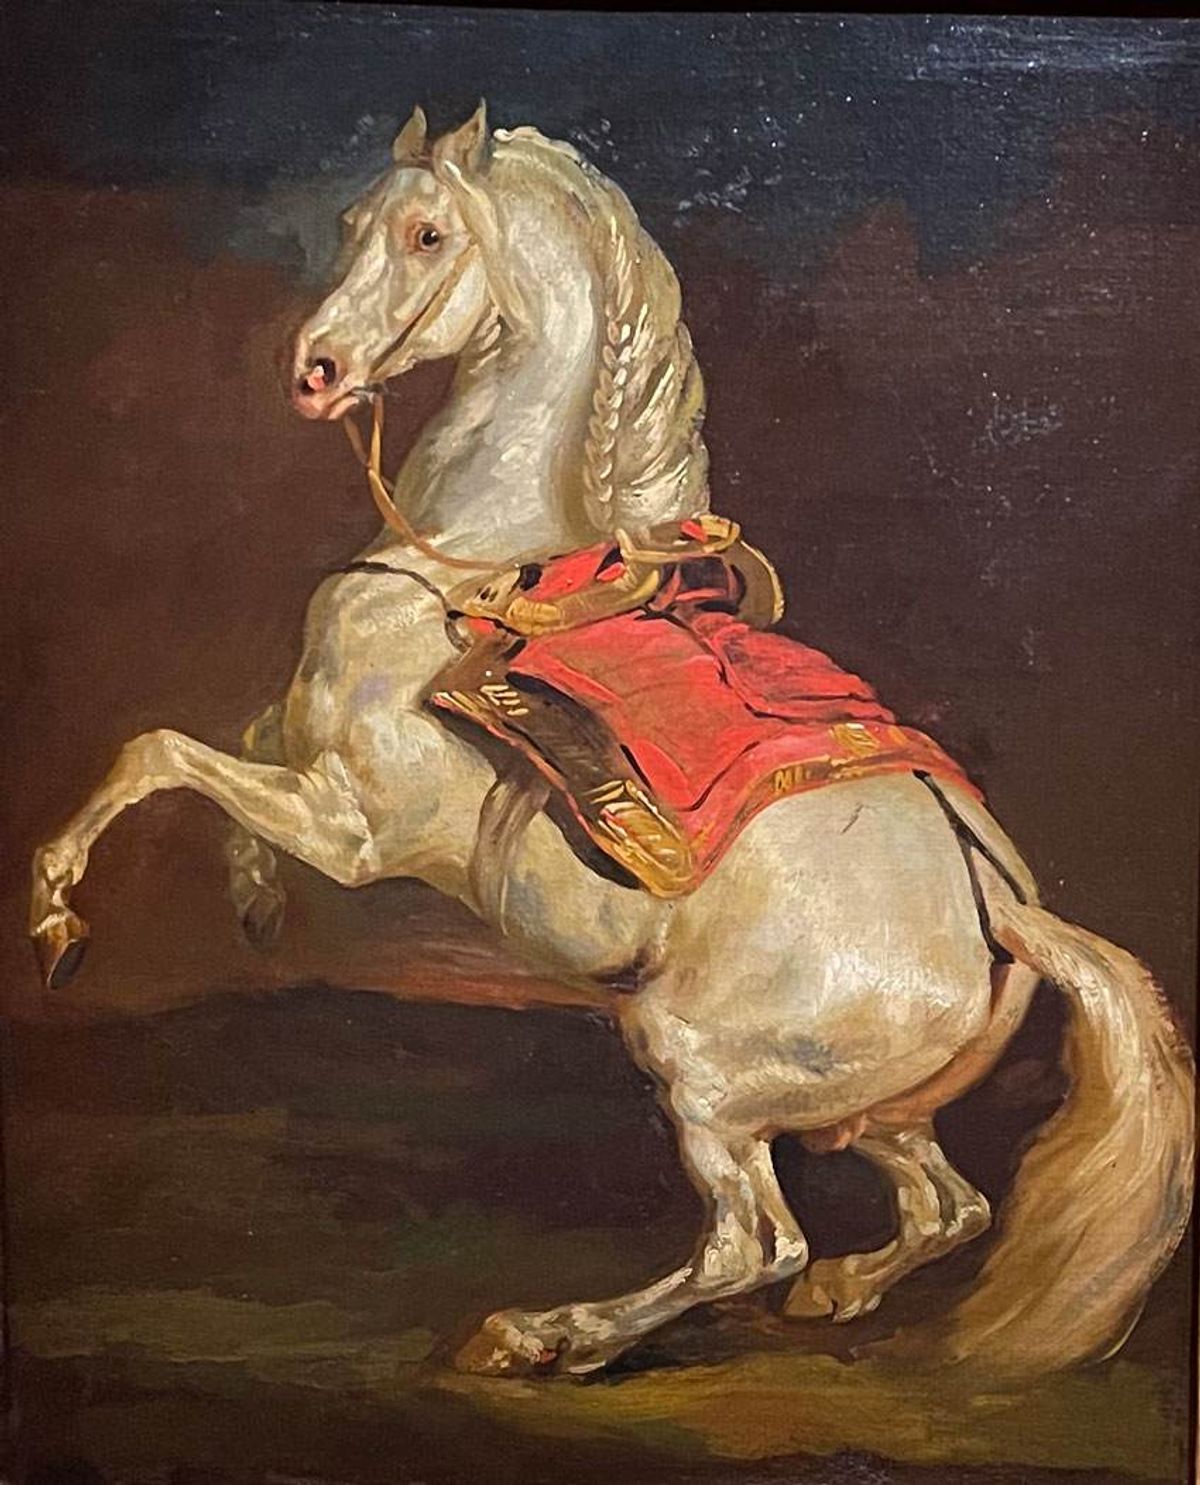 Théodore Géricault's Cheval cabré au tapis de selle rouge (1814) from the Musée des Beaux-Arts in Rouen is not one of the disputed works Photo: © RMN-Grand Palais/image RMN-GP